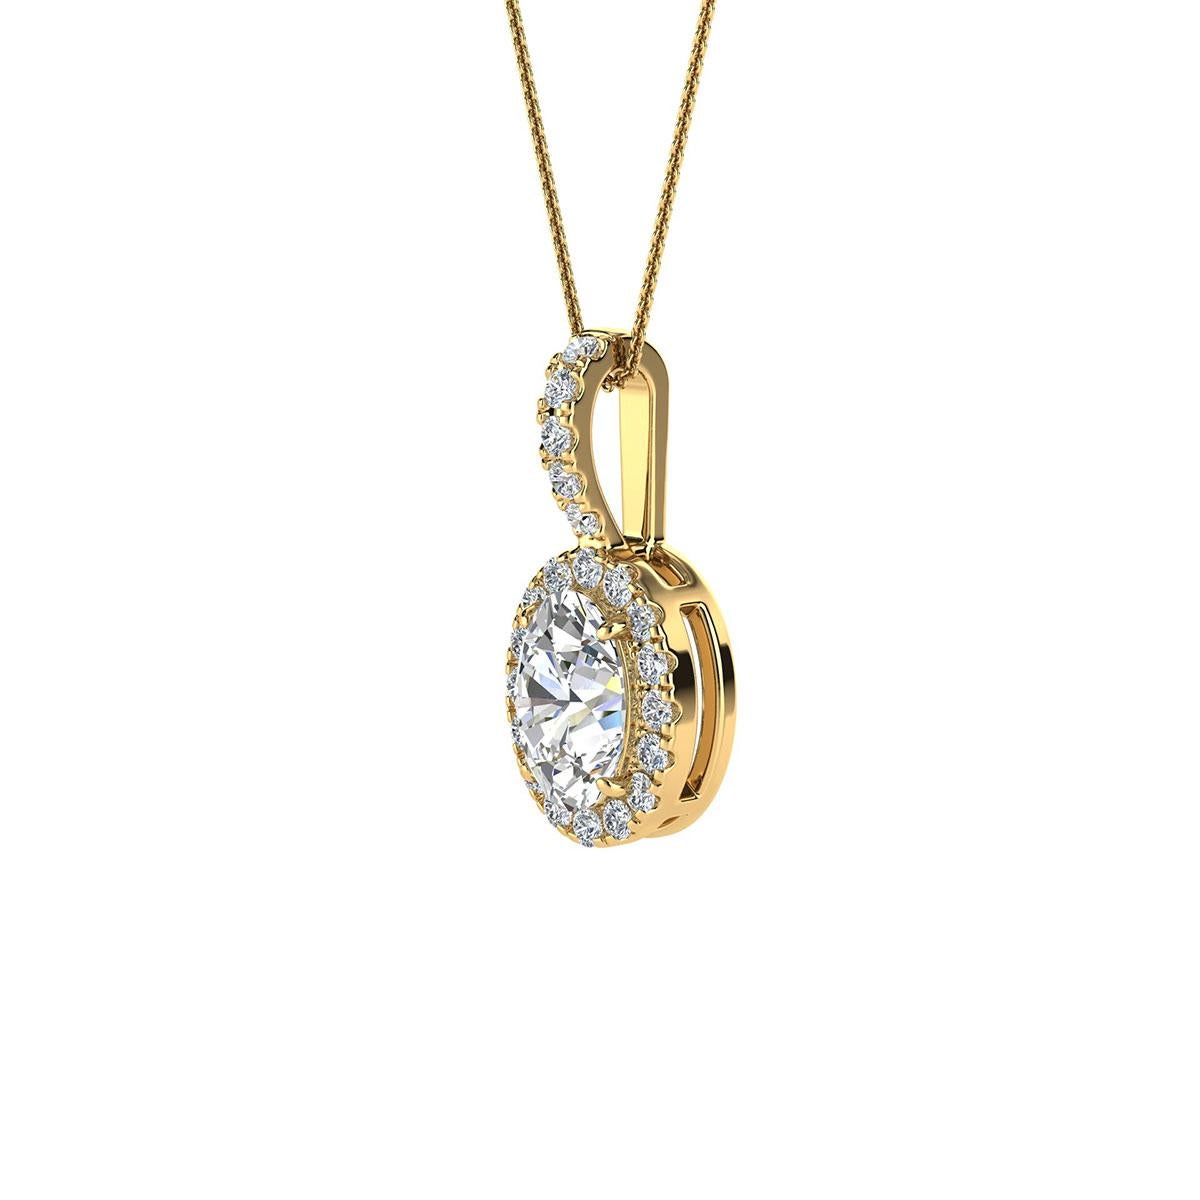 This delicate pendant features one oval-shaped diamond that is approximately 0.47-carat total weight ( 6mm x 4mm) encircled by a halo of perfectly matched 21 brilliant round diamonds in about 0.12-carat total weight. The pendant is measuring at 15